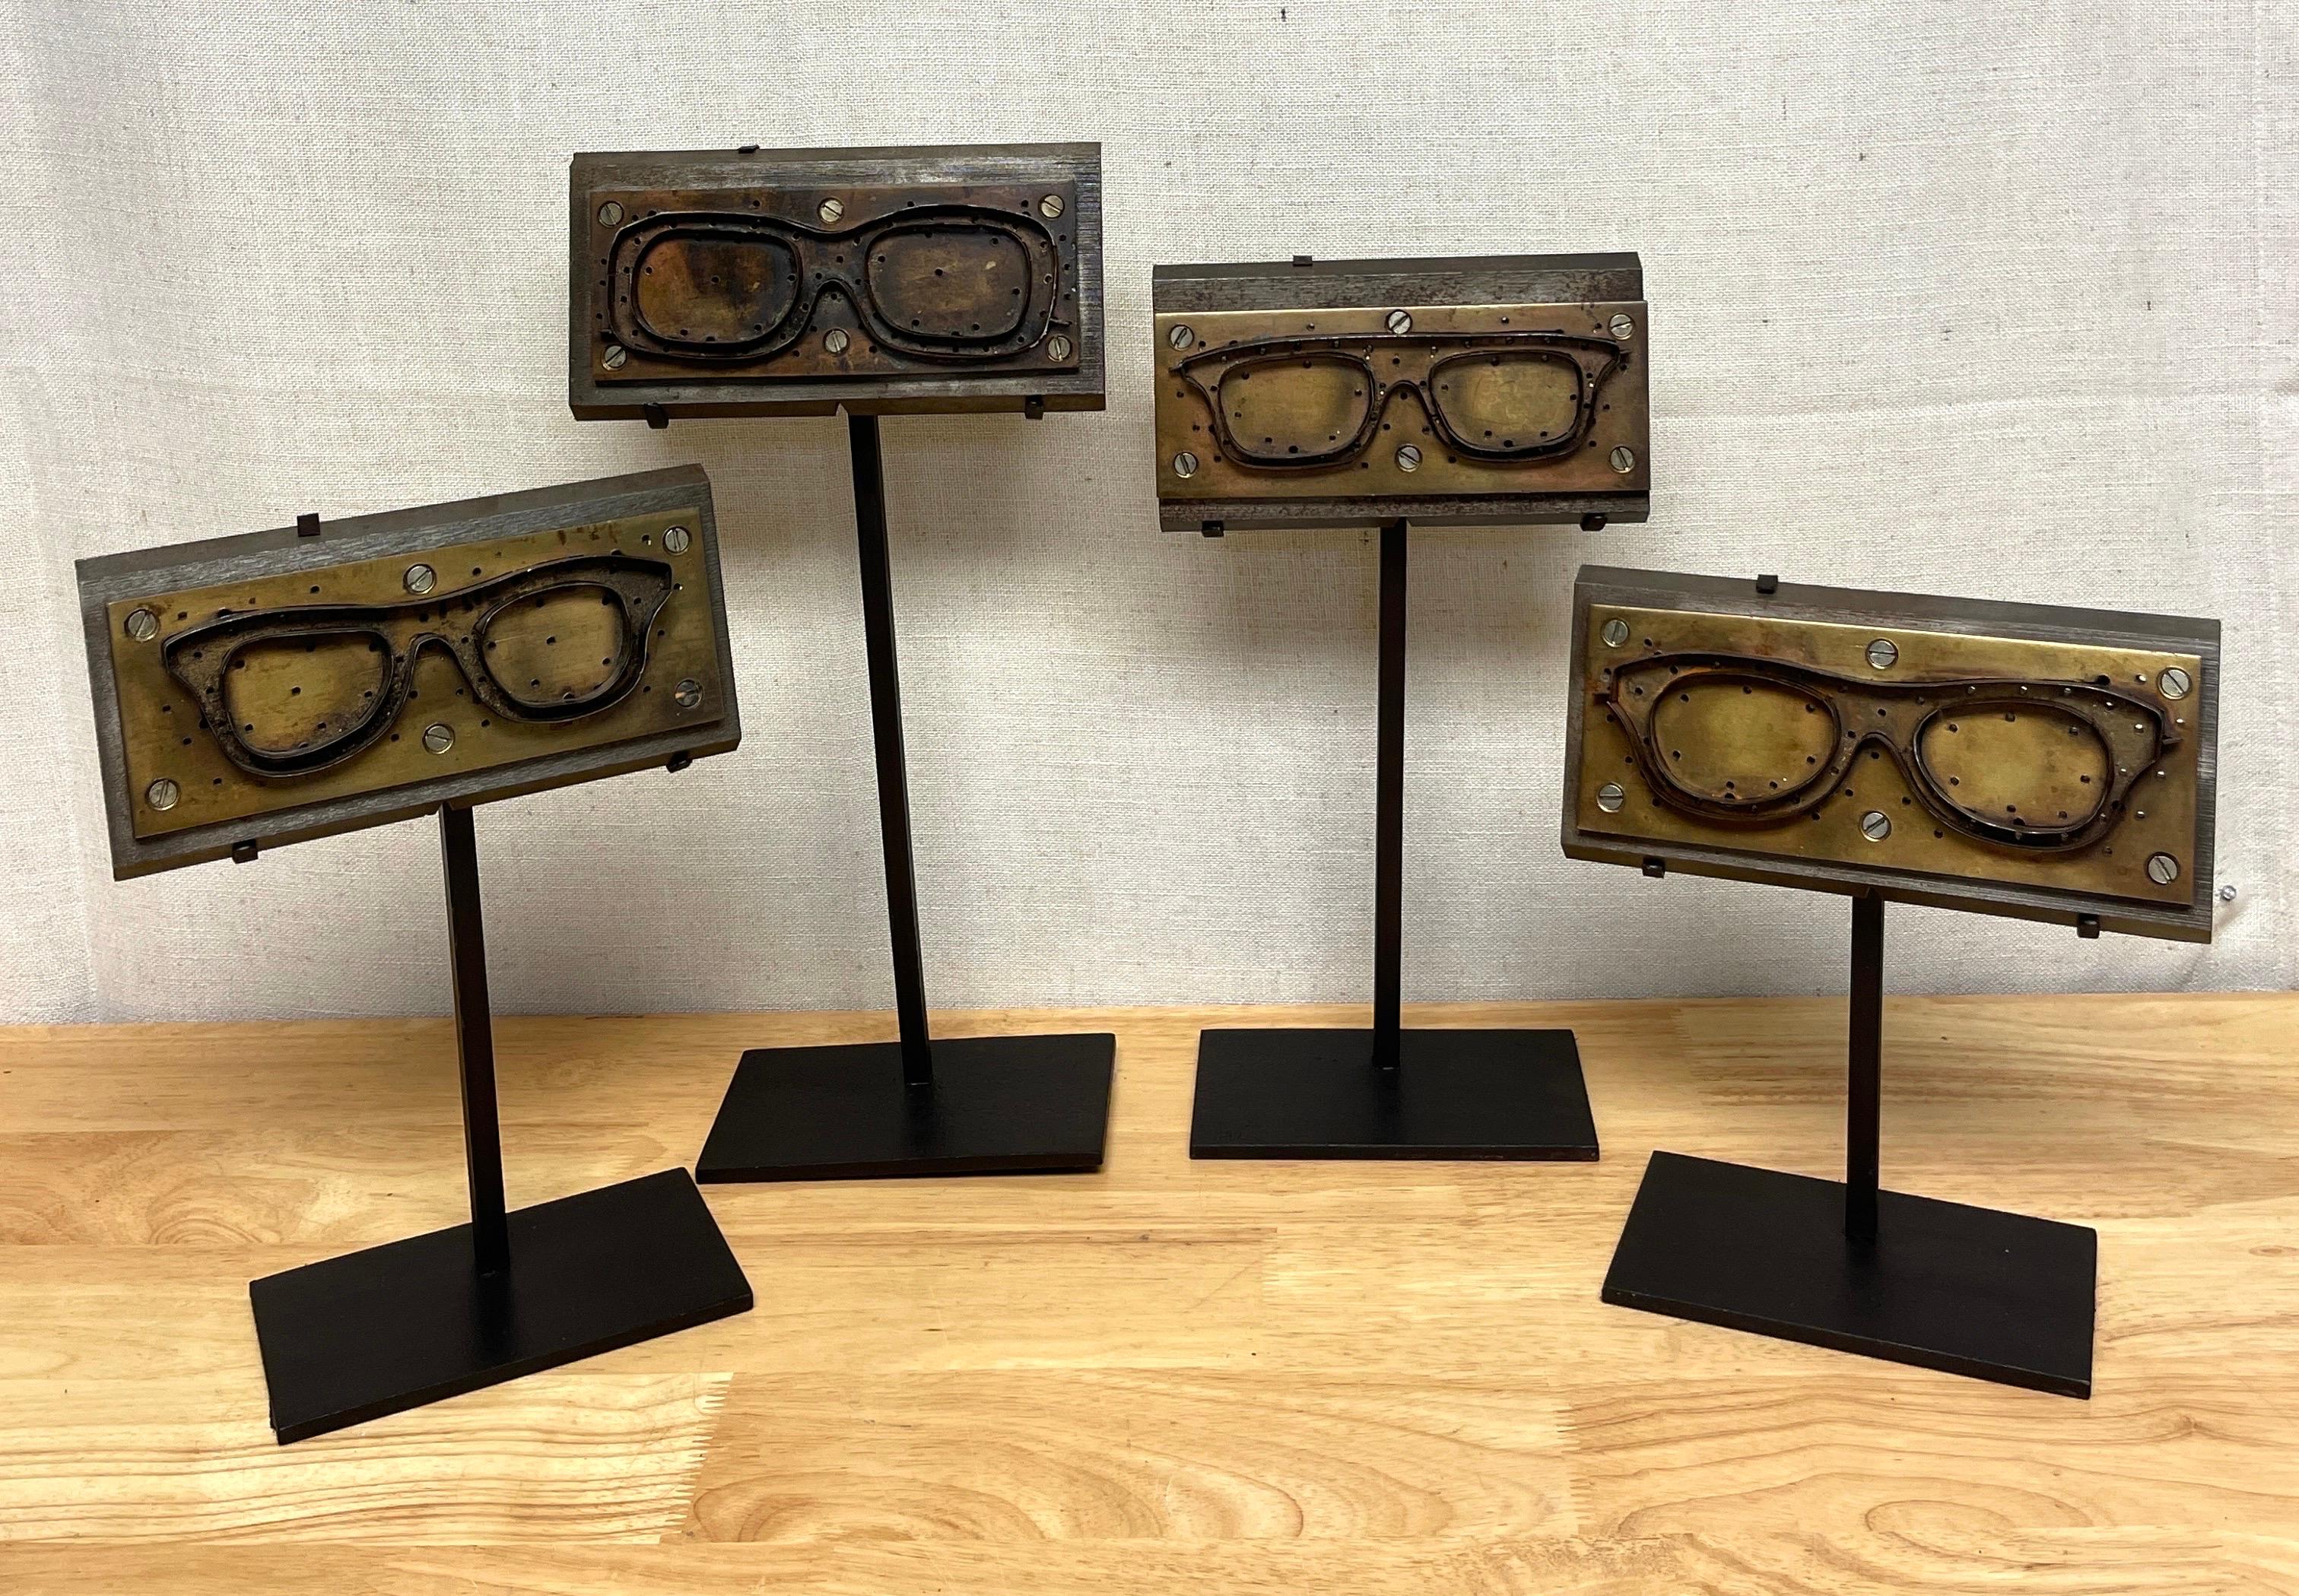 Collection of Museum Mounted Industrial Eye Glass Dyes/Molds
An instant collection of four unique actual industrial brass and iron molds for eyeglass frames, each one museum mounted on later iron stands. 
Varying heights and sizes, sold as a